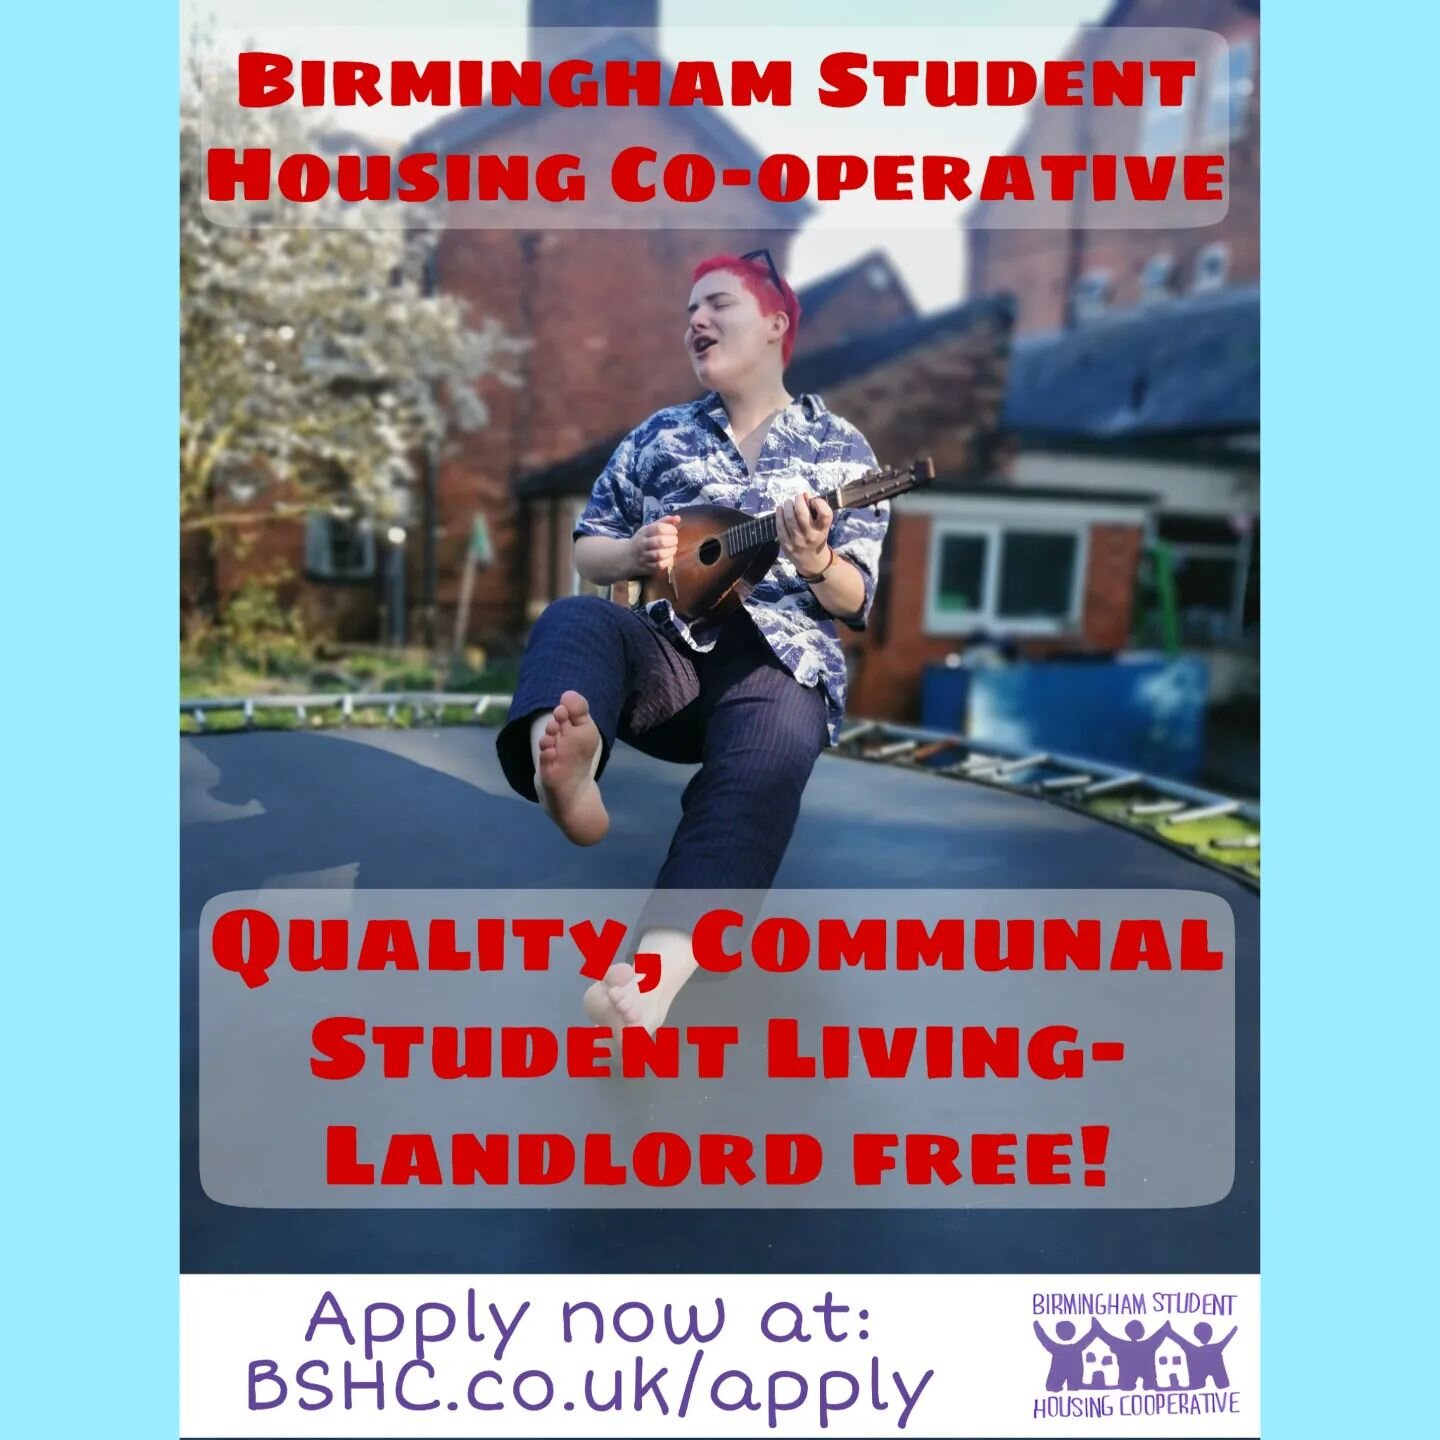 Applications are now open for the academic year 2022-23!

Birmingham Student Housing Co-operative provides low-cost, high-quality, democratically run student housing!

At BSHC we have a large 9-bedroom house, with communal living space, a fully equip